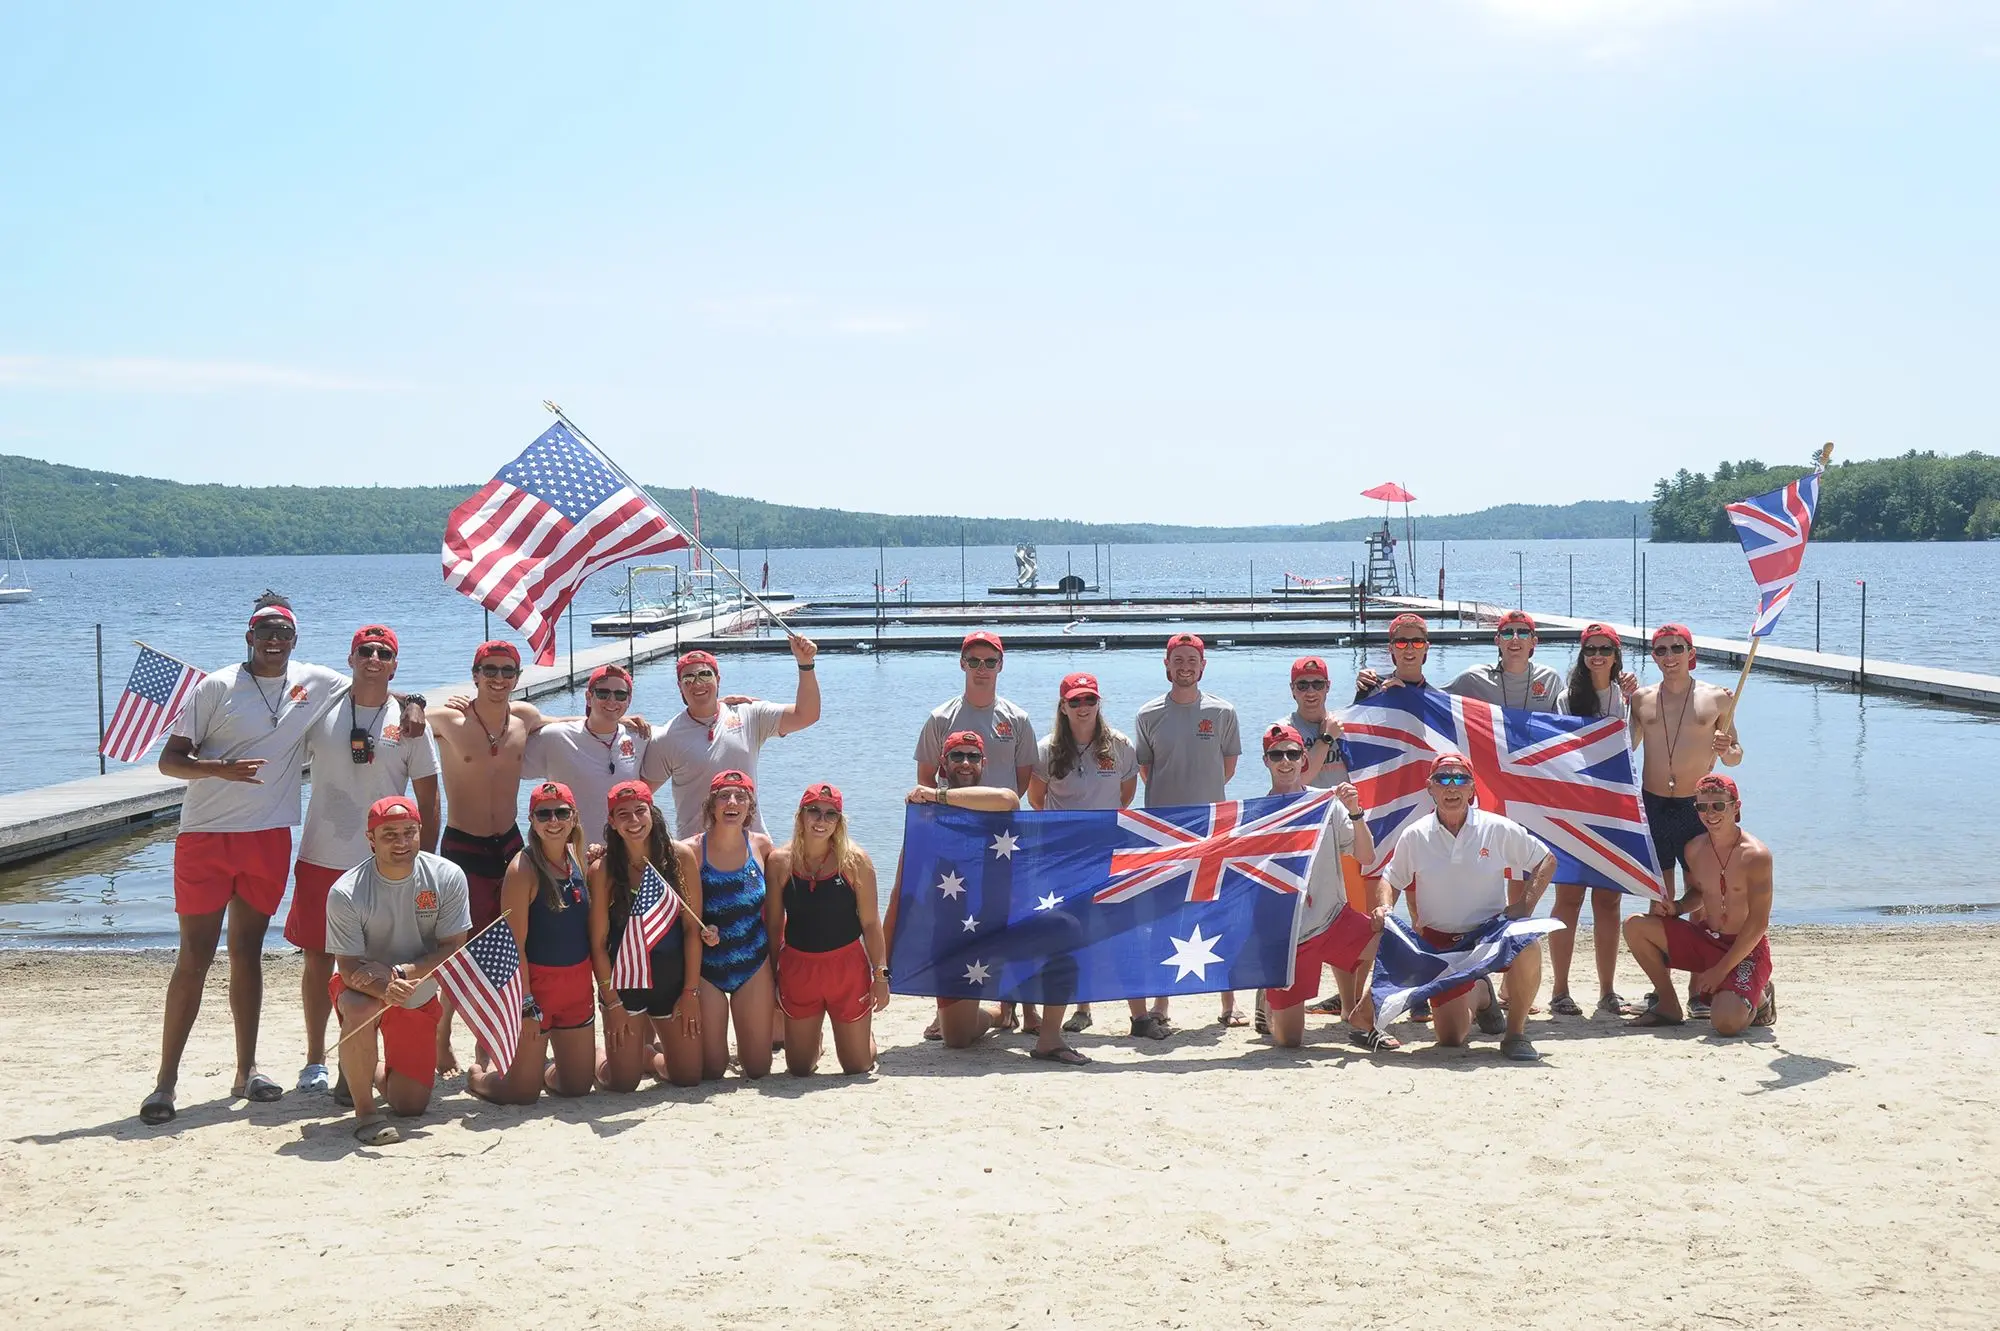 A group of campers stand in the sun next to a lake waving America, Australian and UK flags